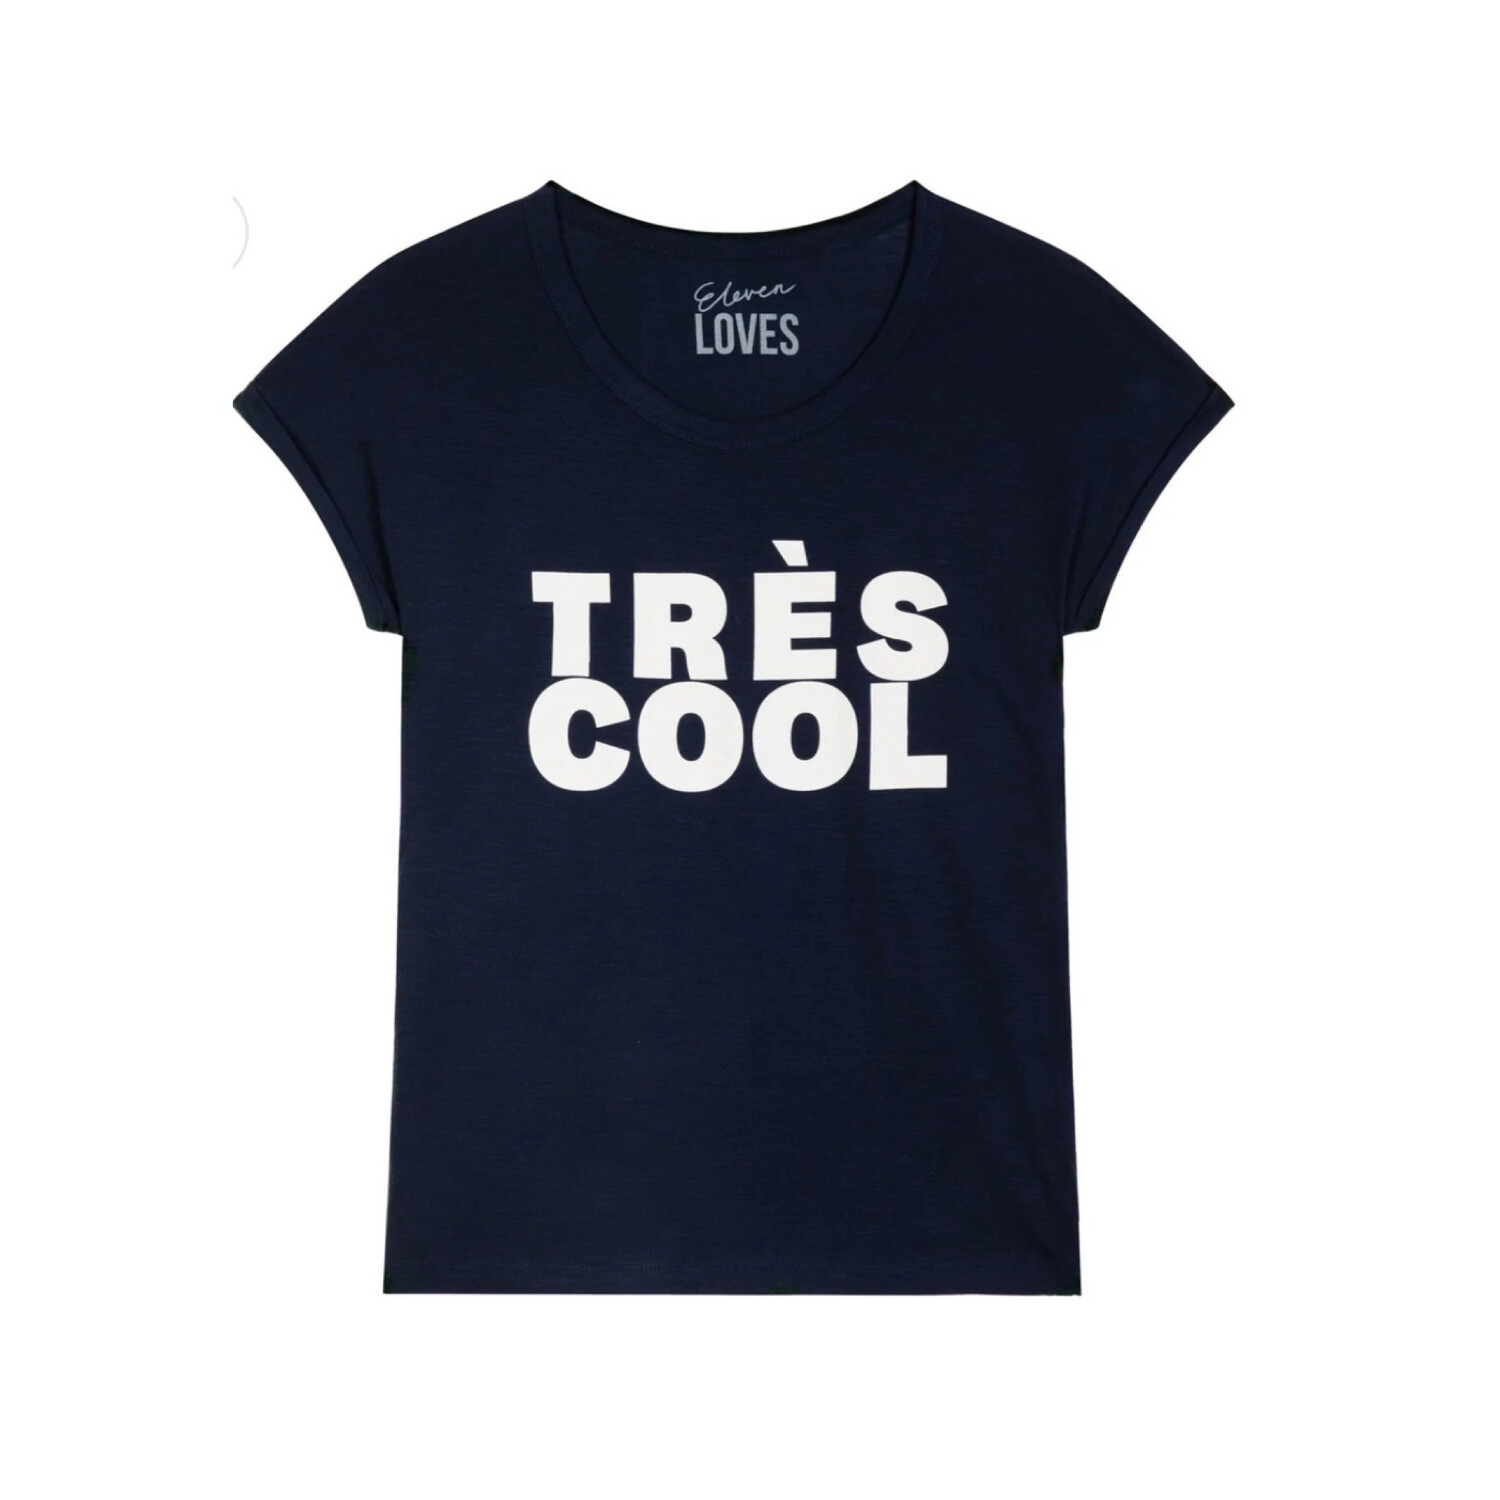 Eleven Loves - TRES COOL T Shirt